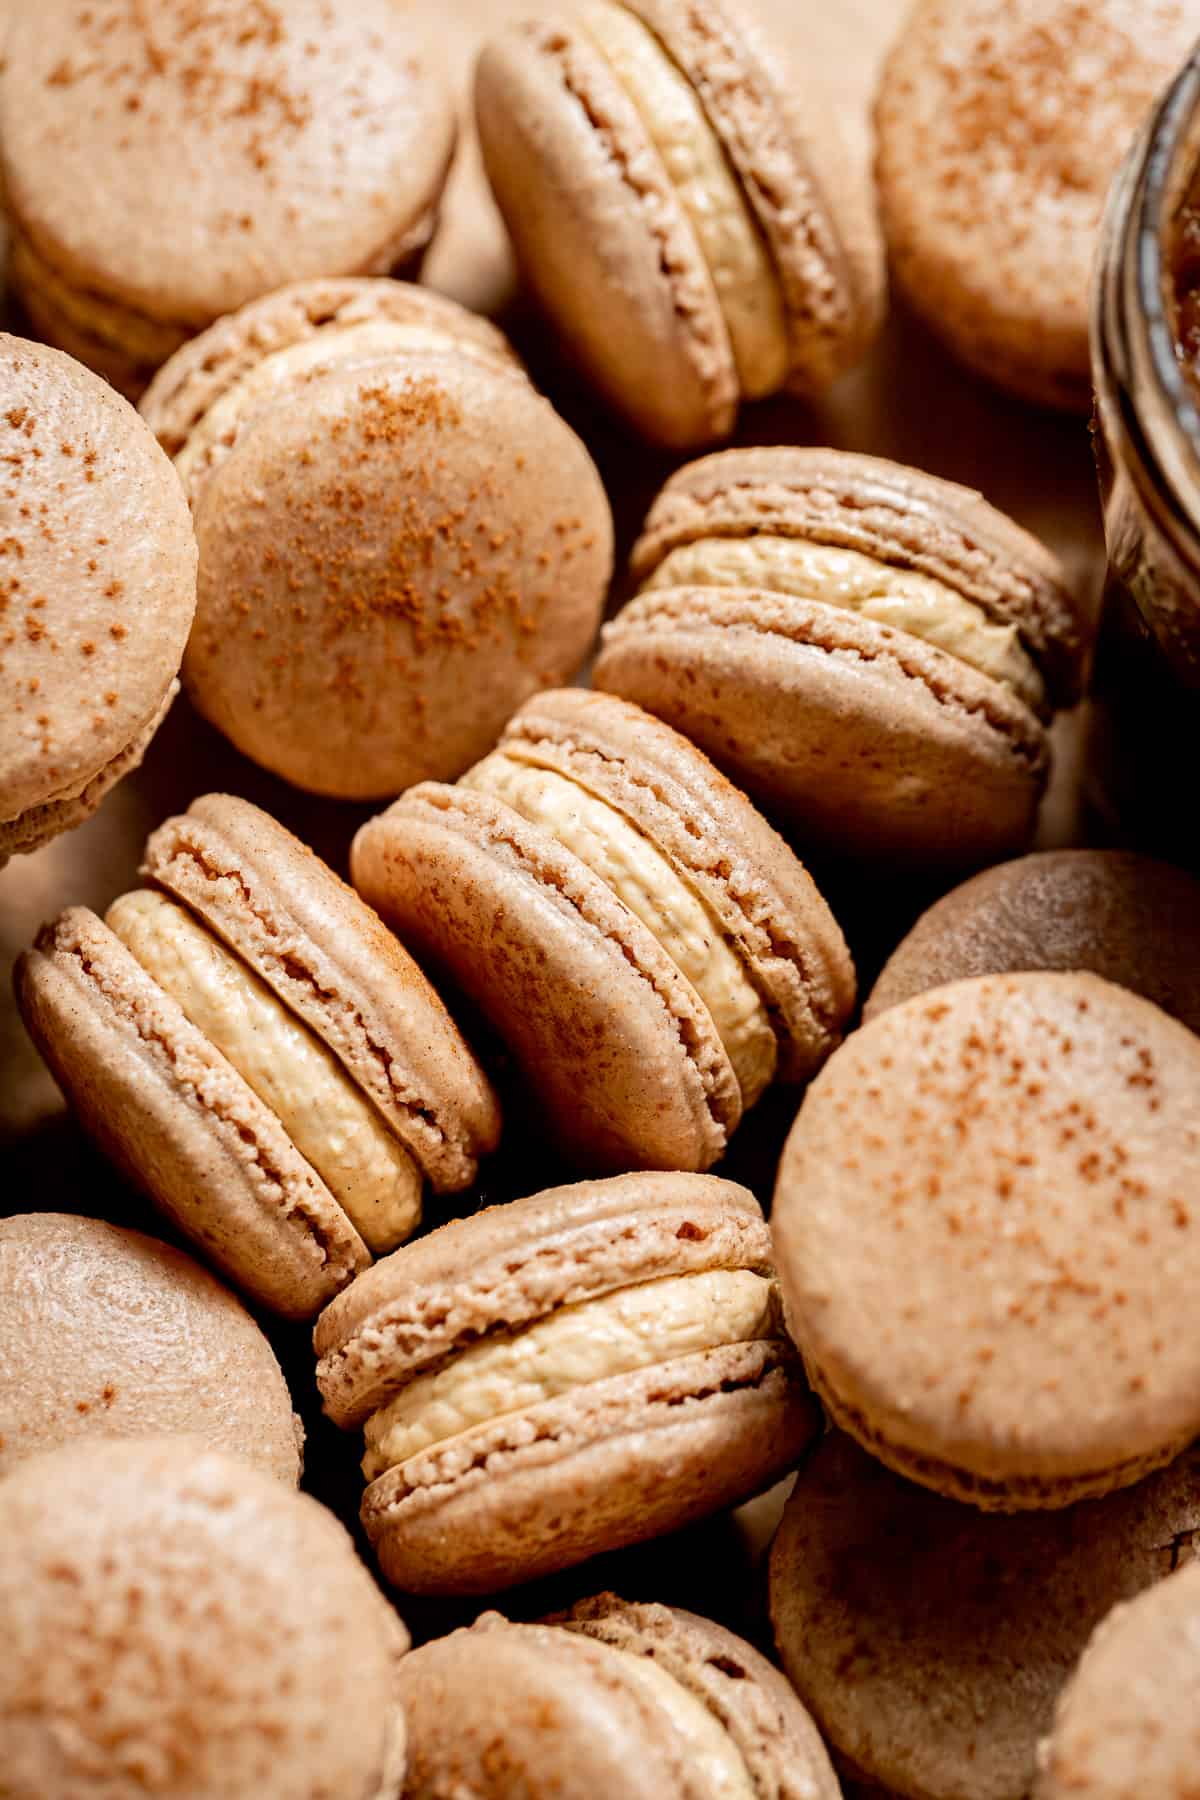 These apple butter macarons made with SugarBee® apples are the